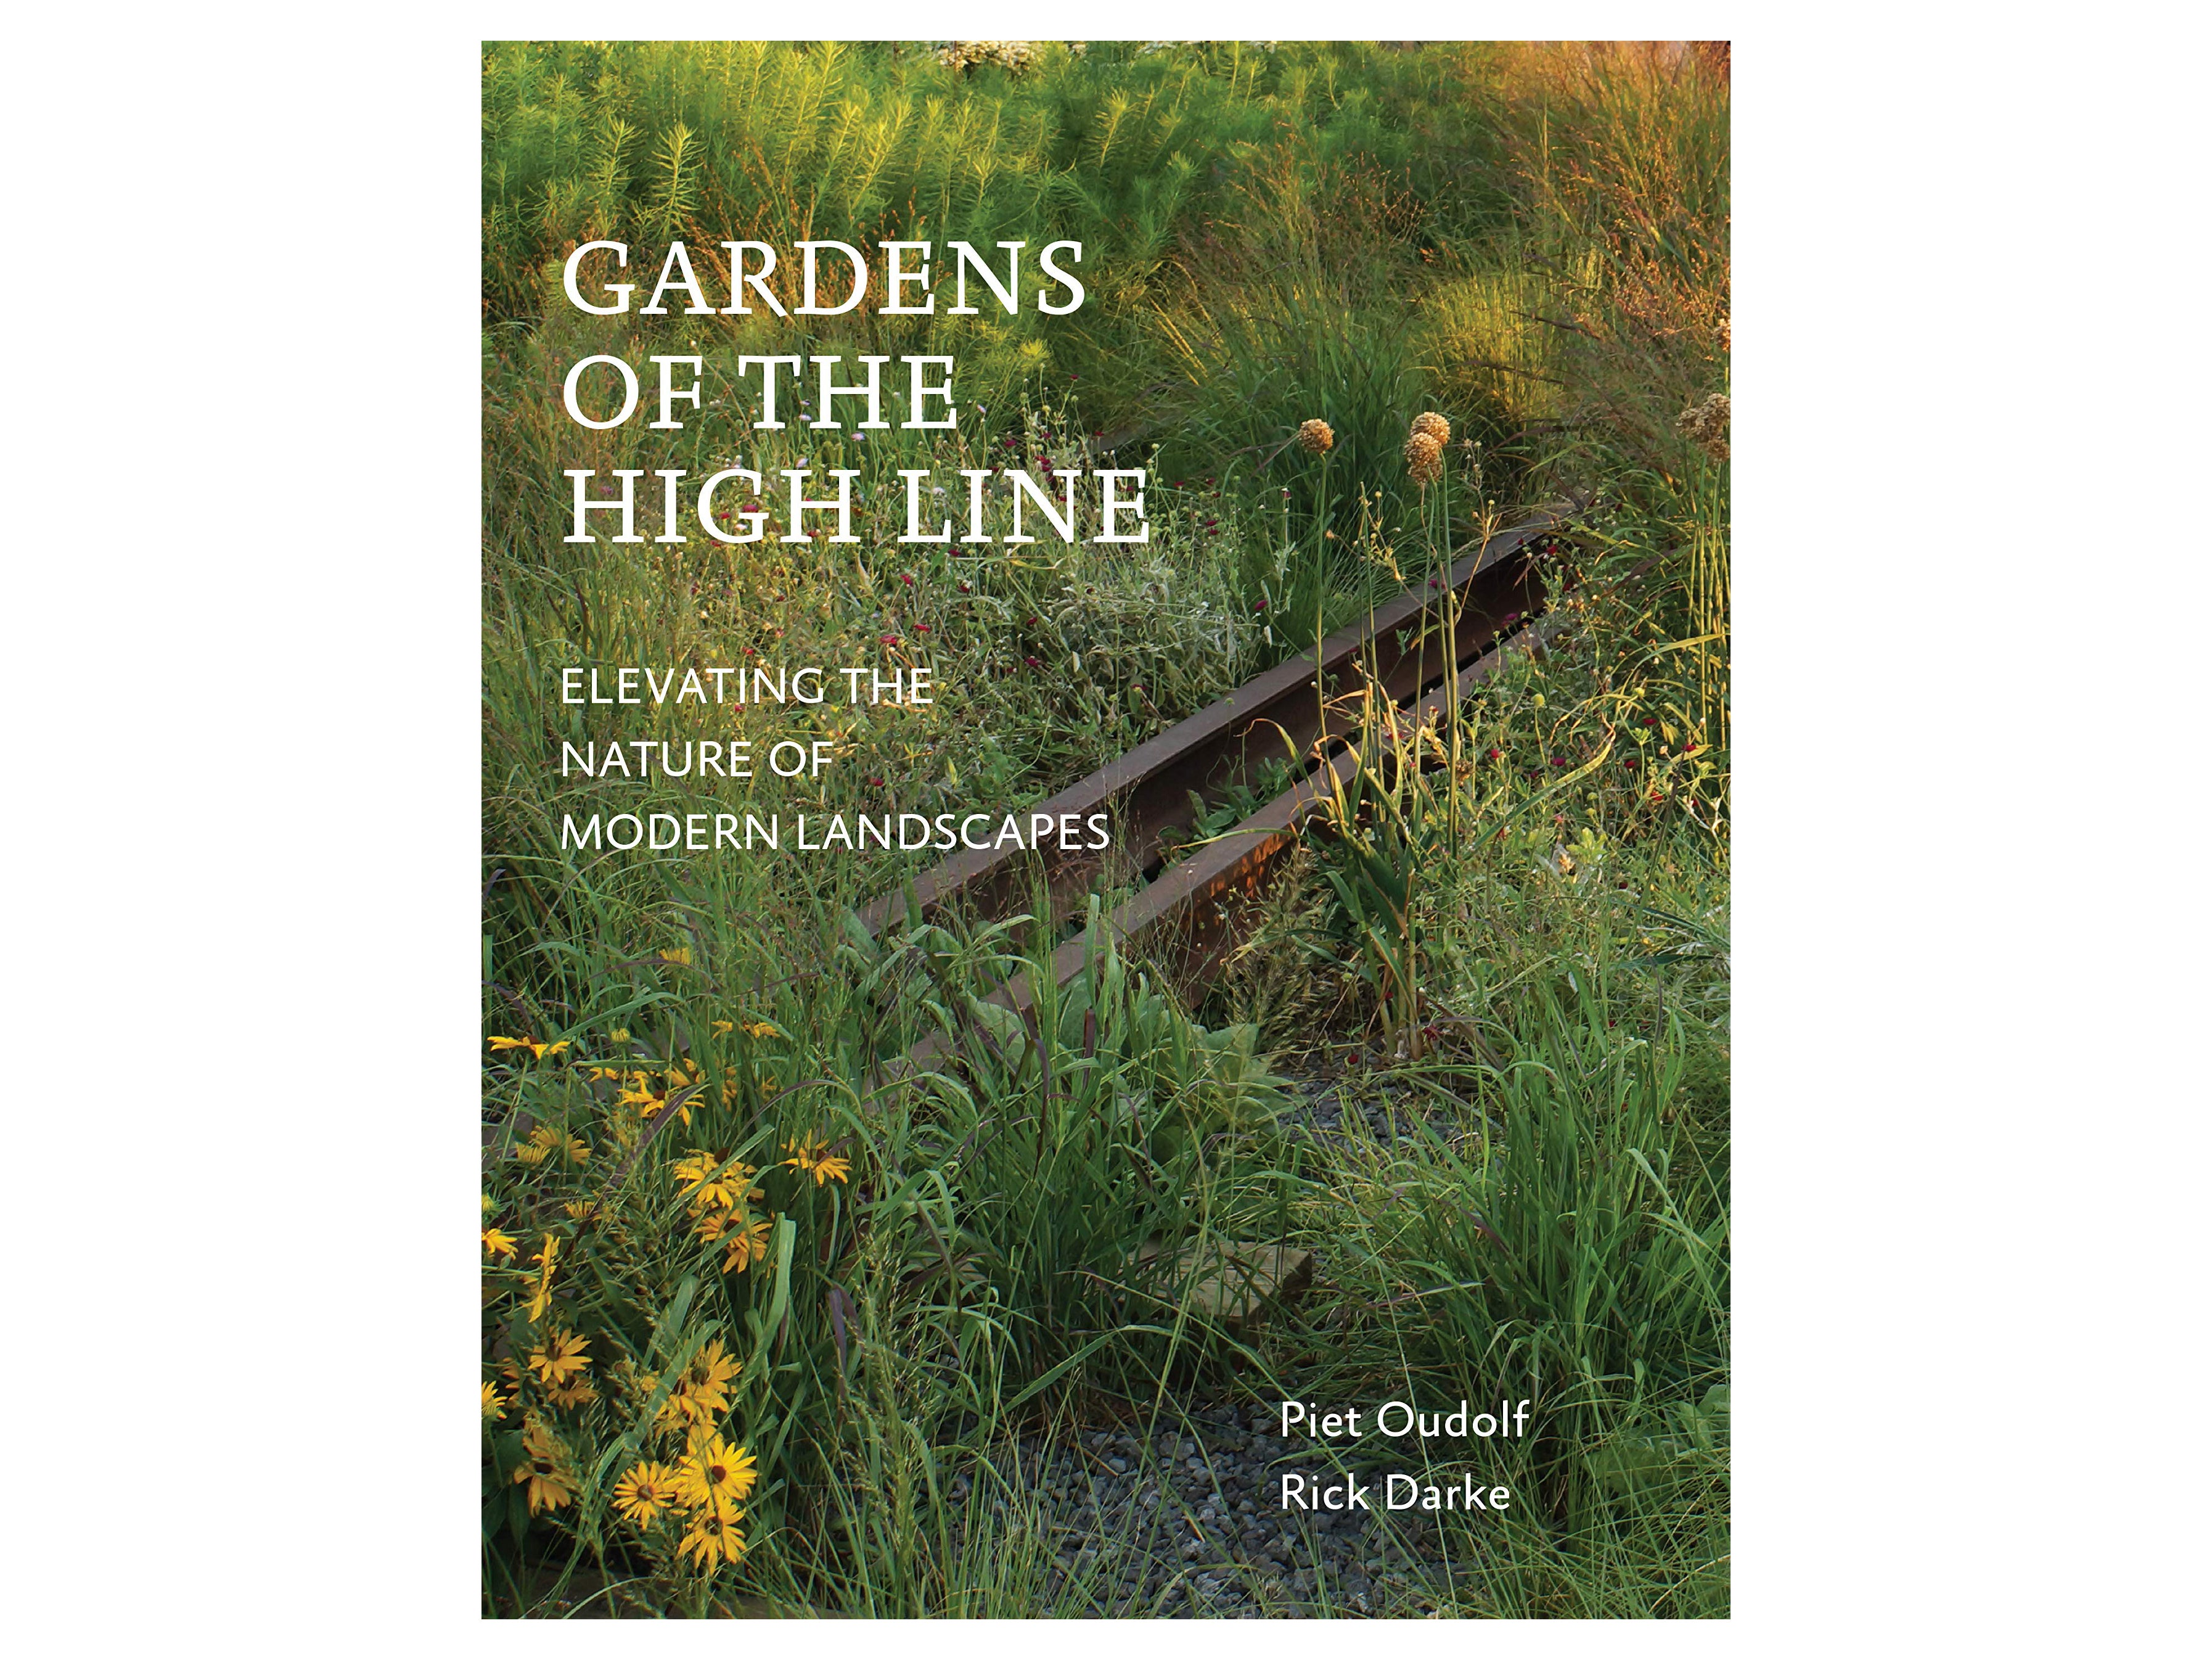 ‘Gardens of the High Line’ by Piet Oudolf and Rick Darke, published by Timber Press .jpg